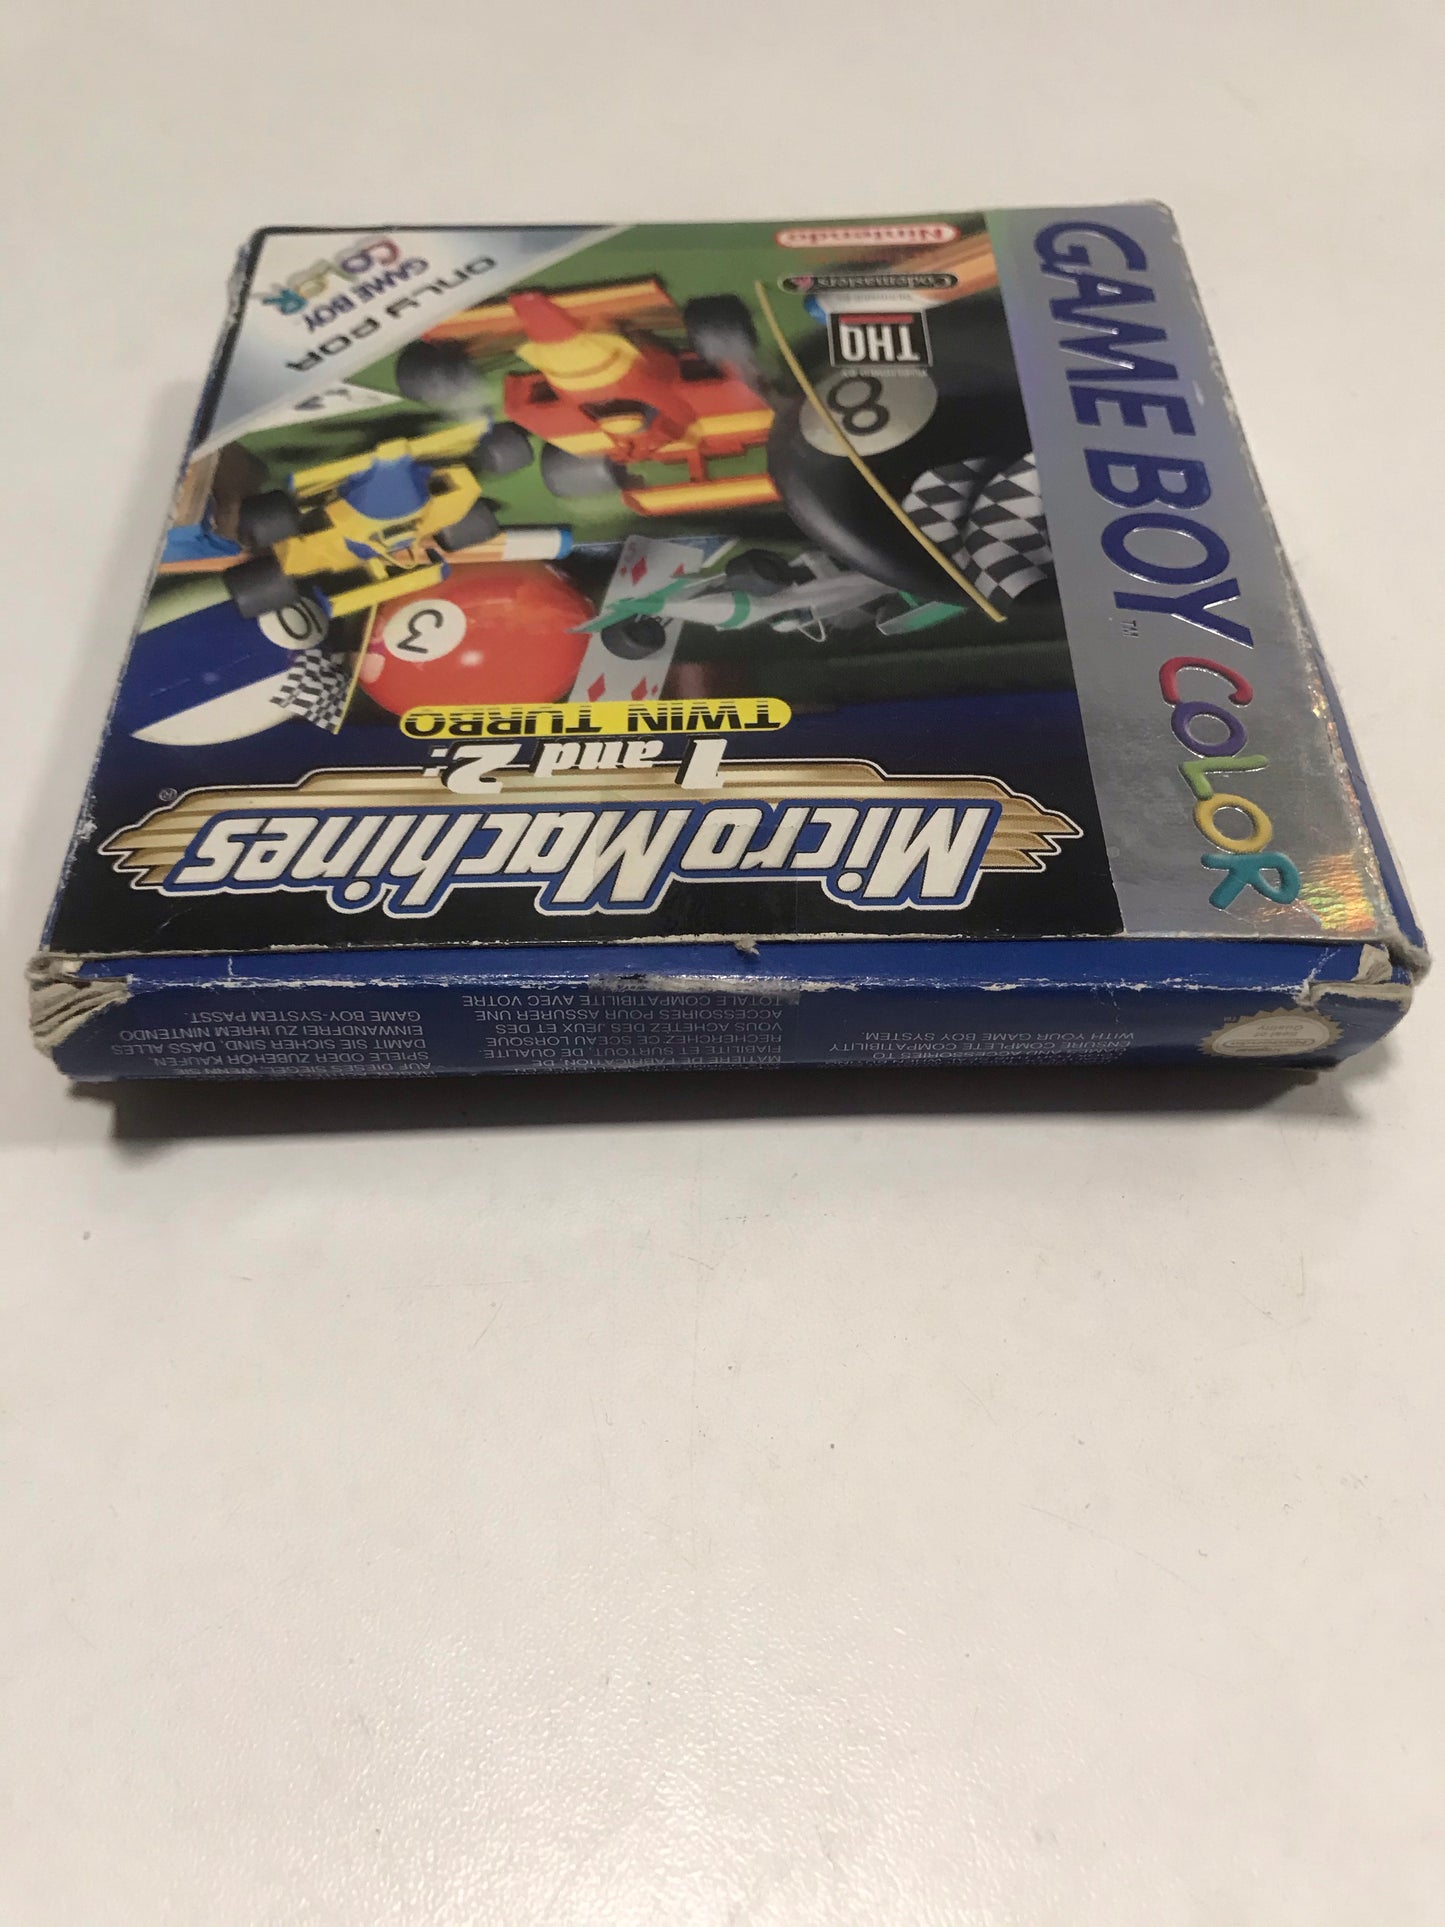 Micro machines 1 and 2 twin turbo Nintendo Game boy color avec notice